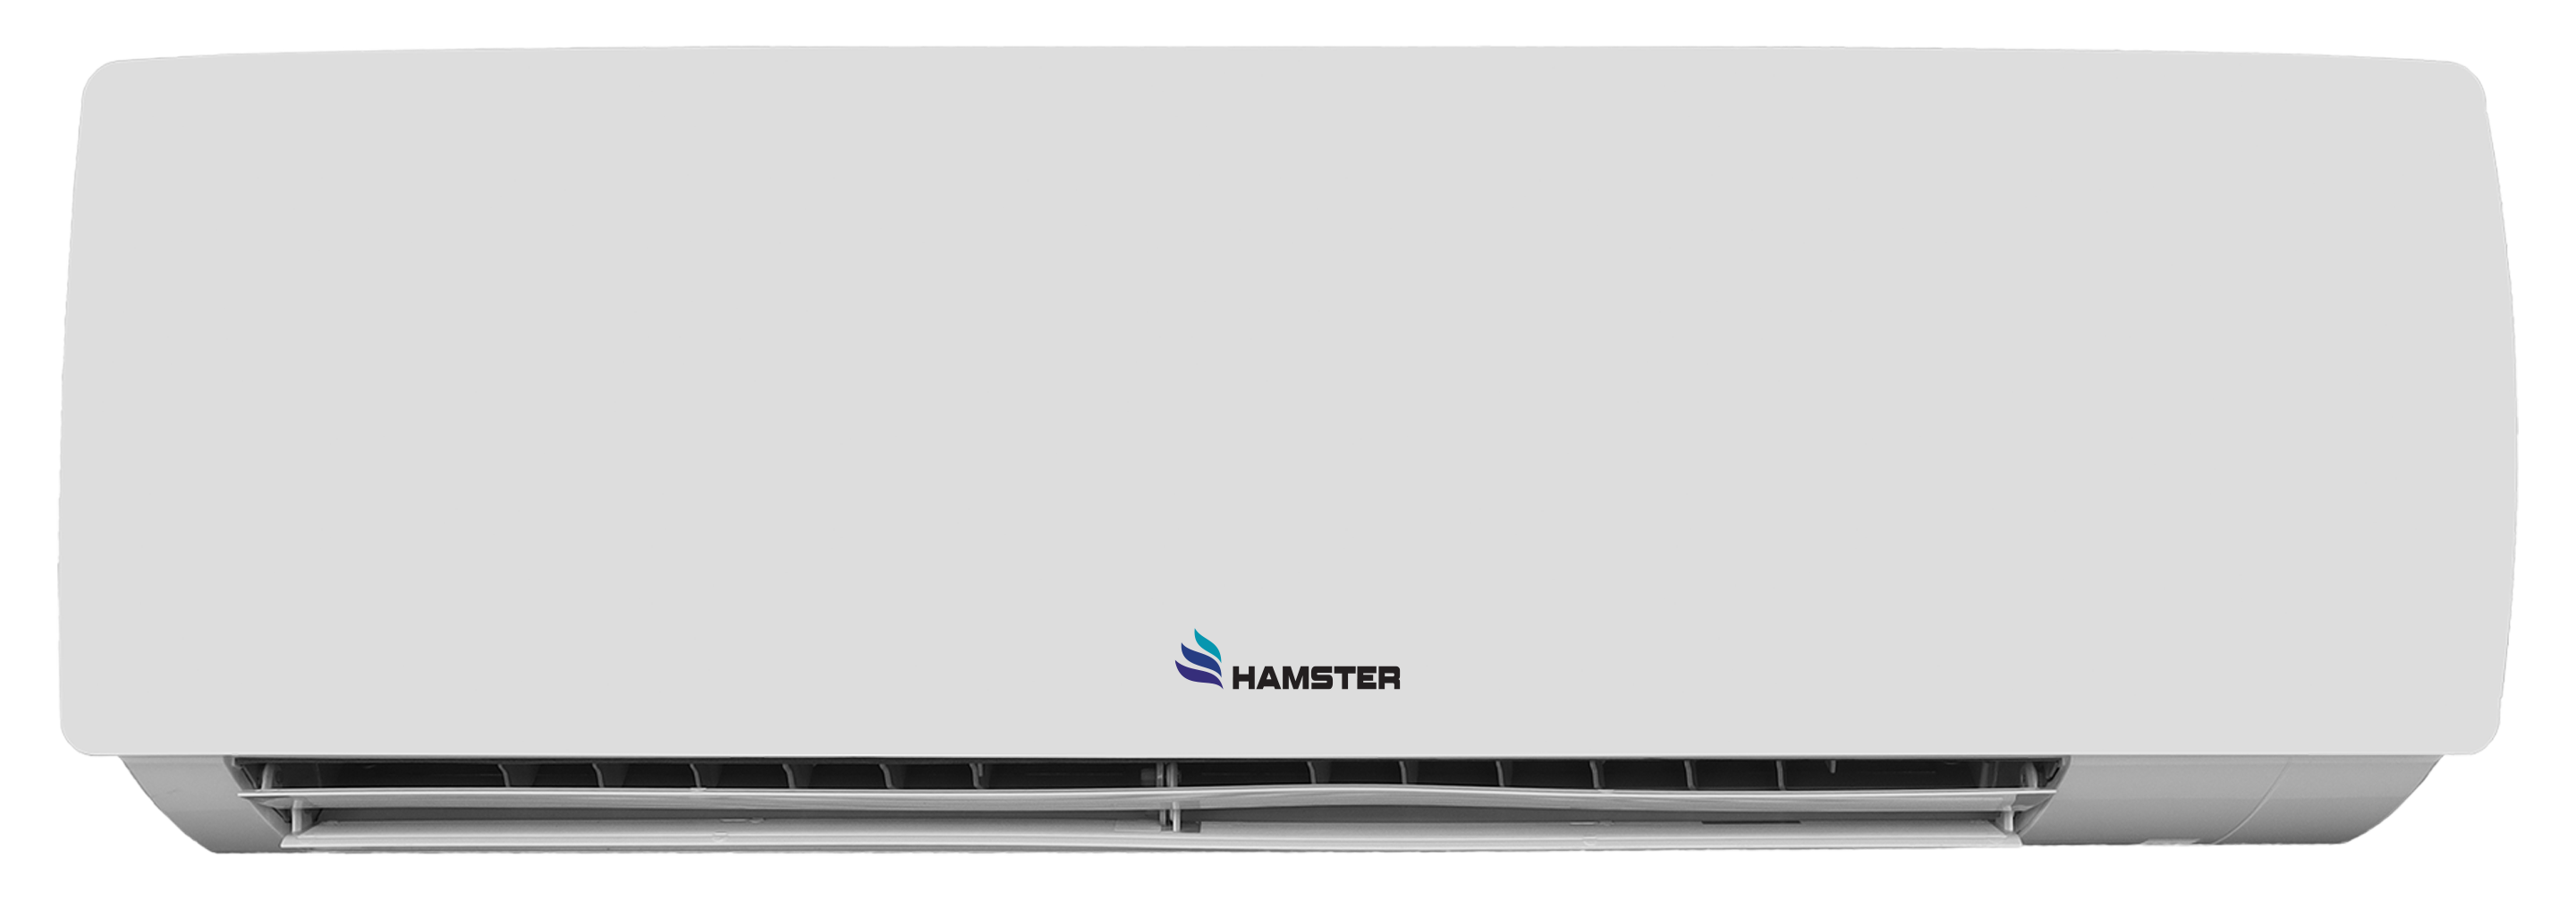 HAMSTER AIR-CONDITIONER- Fixed speed split AC